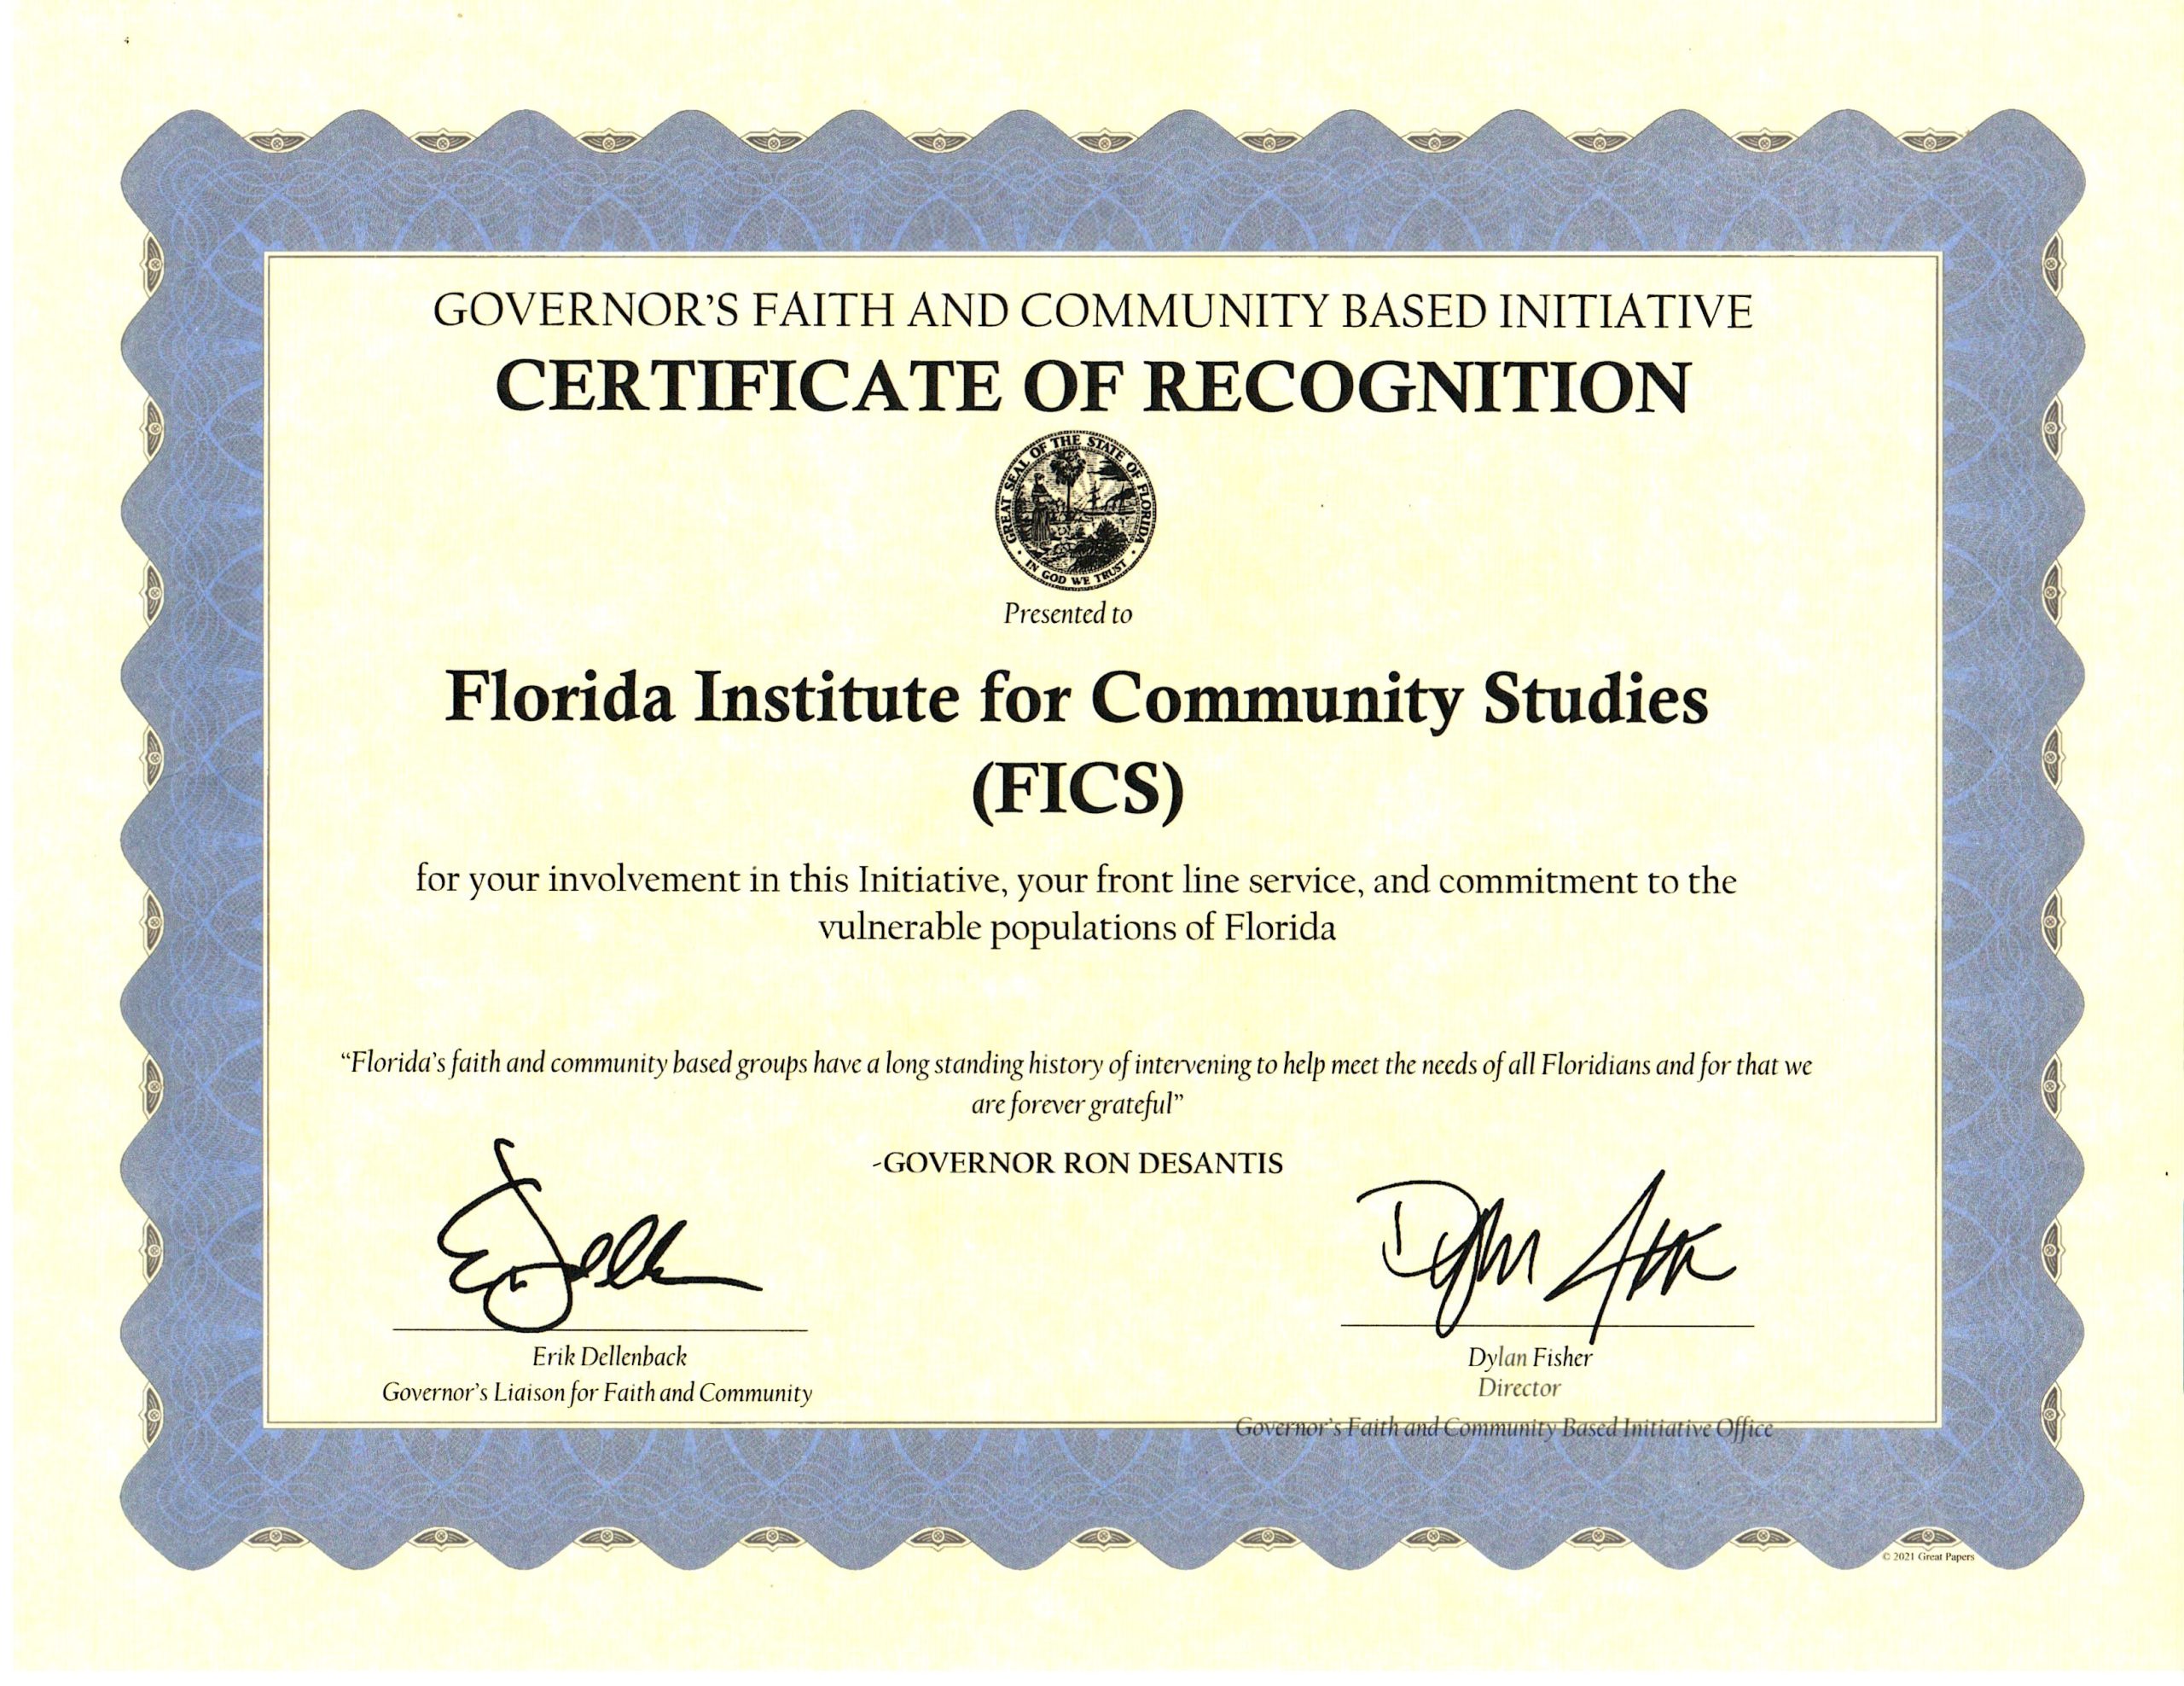 FICS Receives Recognition from the State of Florida